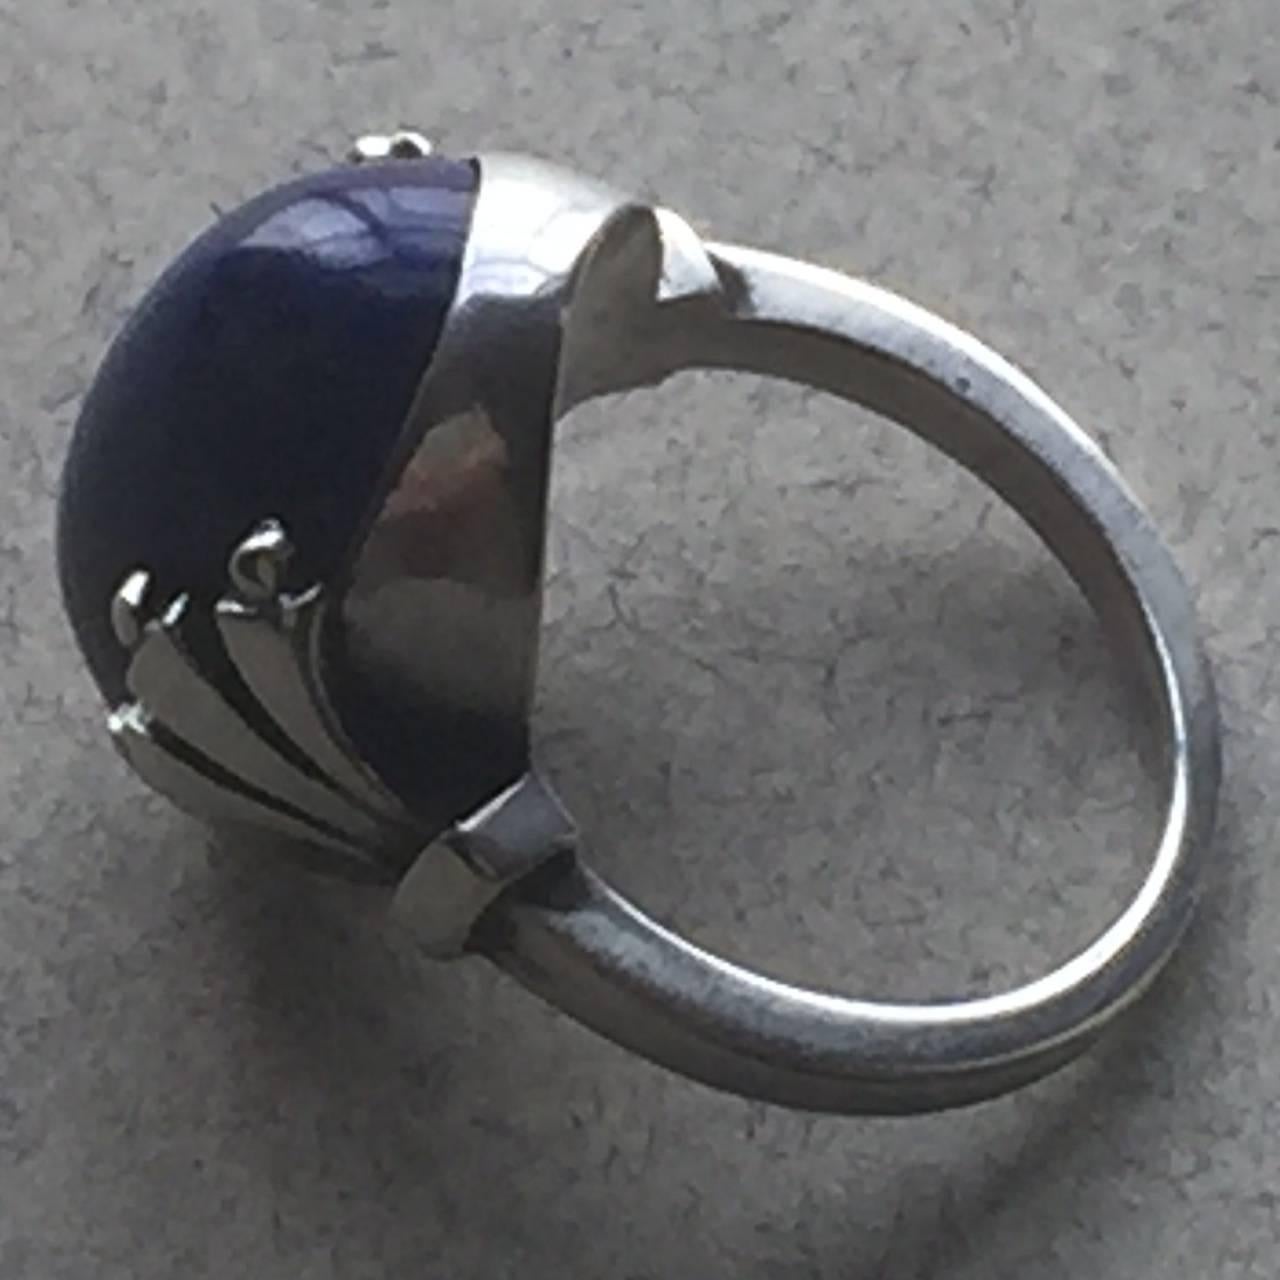 Georg Jensen Sterling Silver Ring No. 51 by Oscar Gundlach-Pedersen.

Beautiful art deco design with a bright and vibrant lapis lazuli gemstone. 

Size 7 ring in excellent condition.

Dimensions: Face of ring - .75